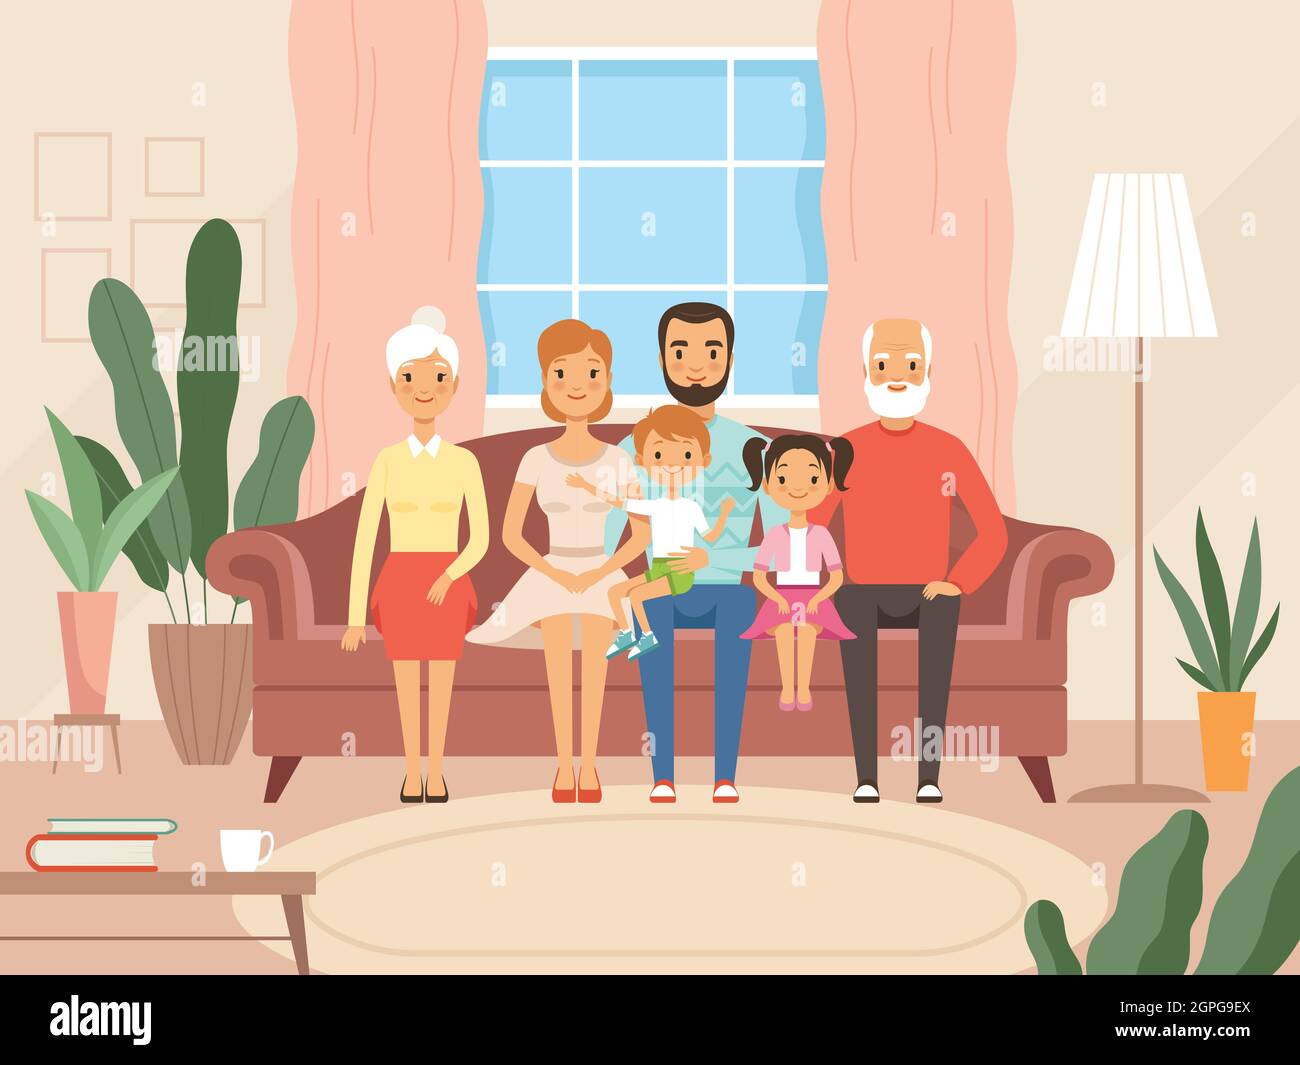 Big family. Mother father kids and grandparents happy characters smiling faces sitting in living room. Vector cartoon background Stock Vector